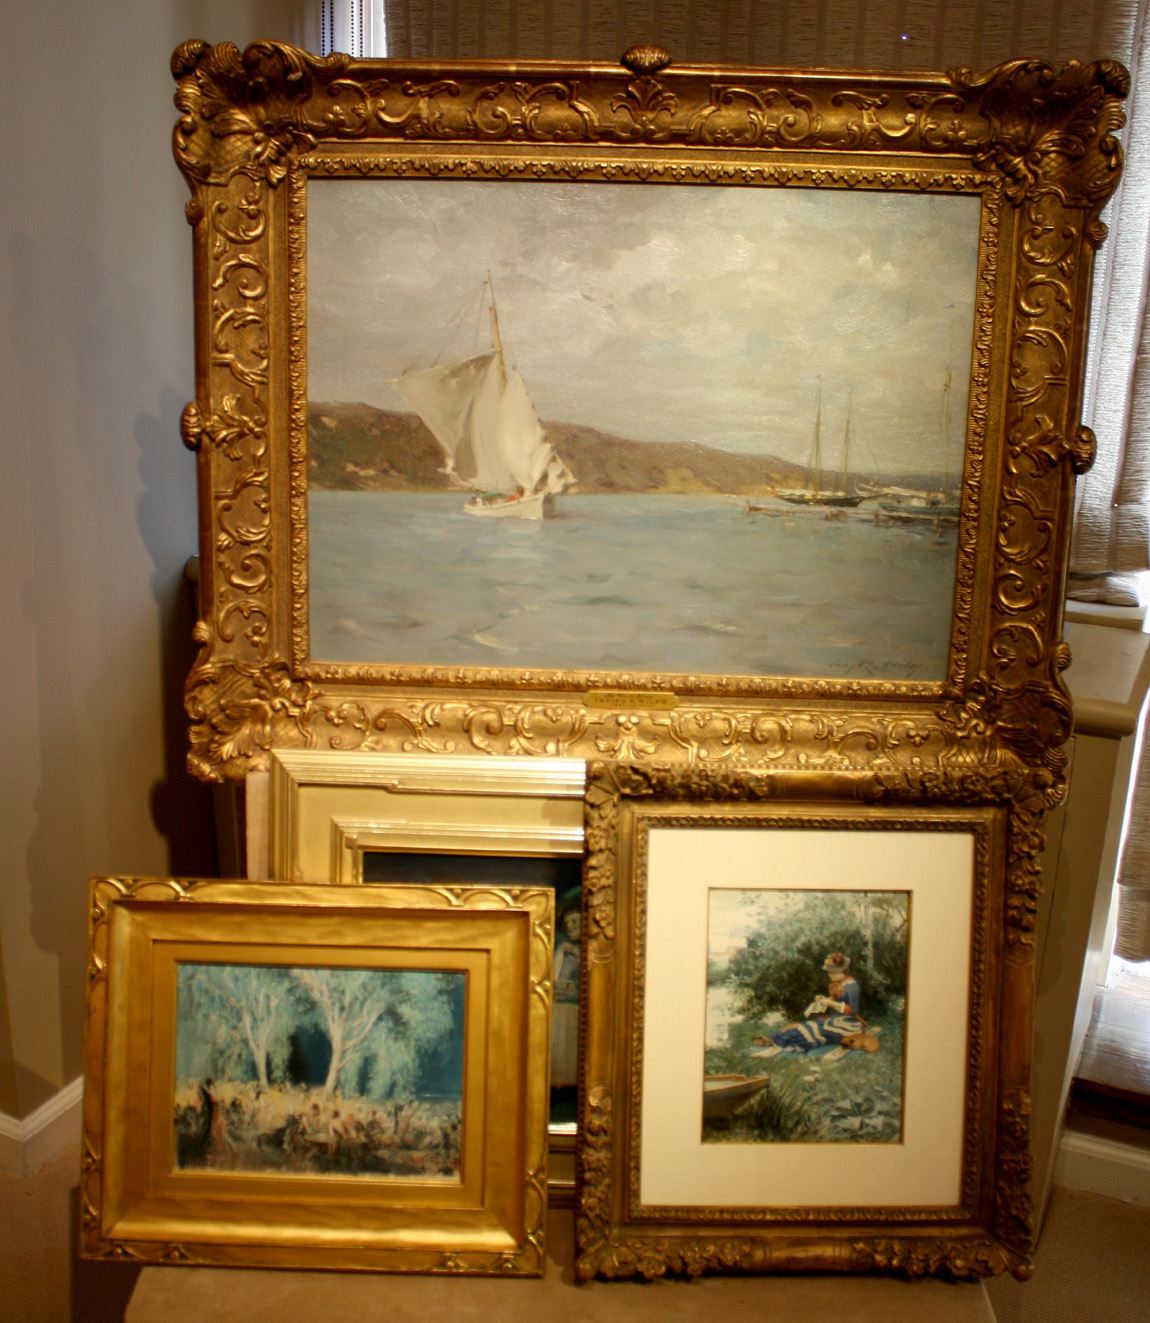 MME Fine Art, LLC (79th Street) had interest in “The White Sloop” by Irving R. Wiles (1861-1948).